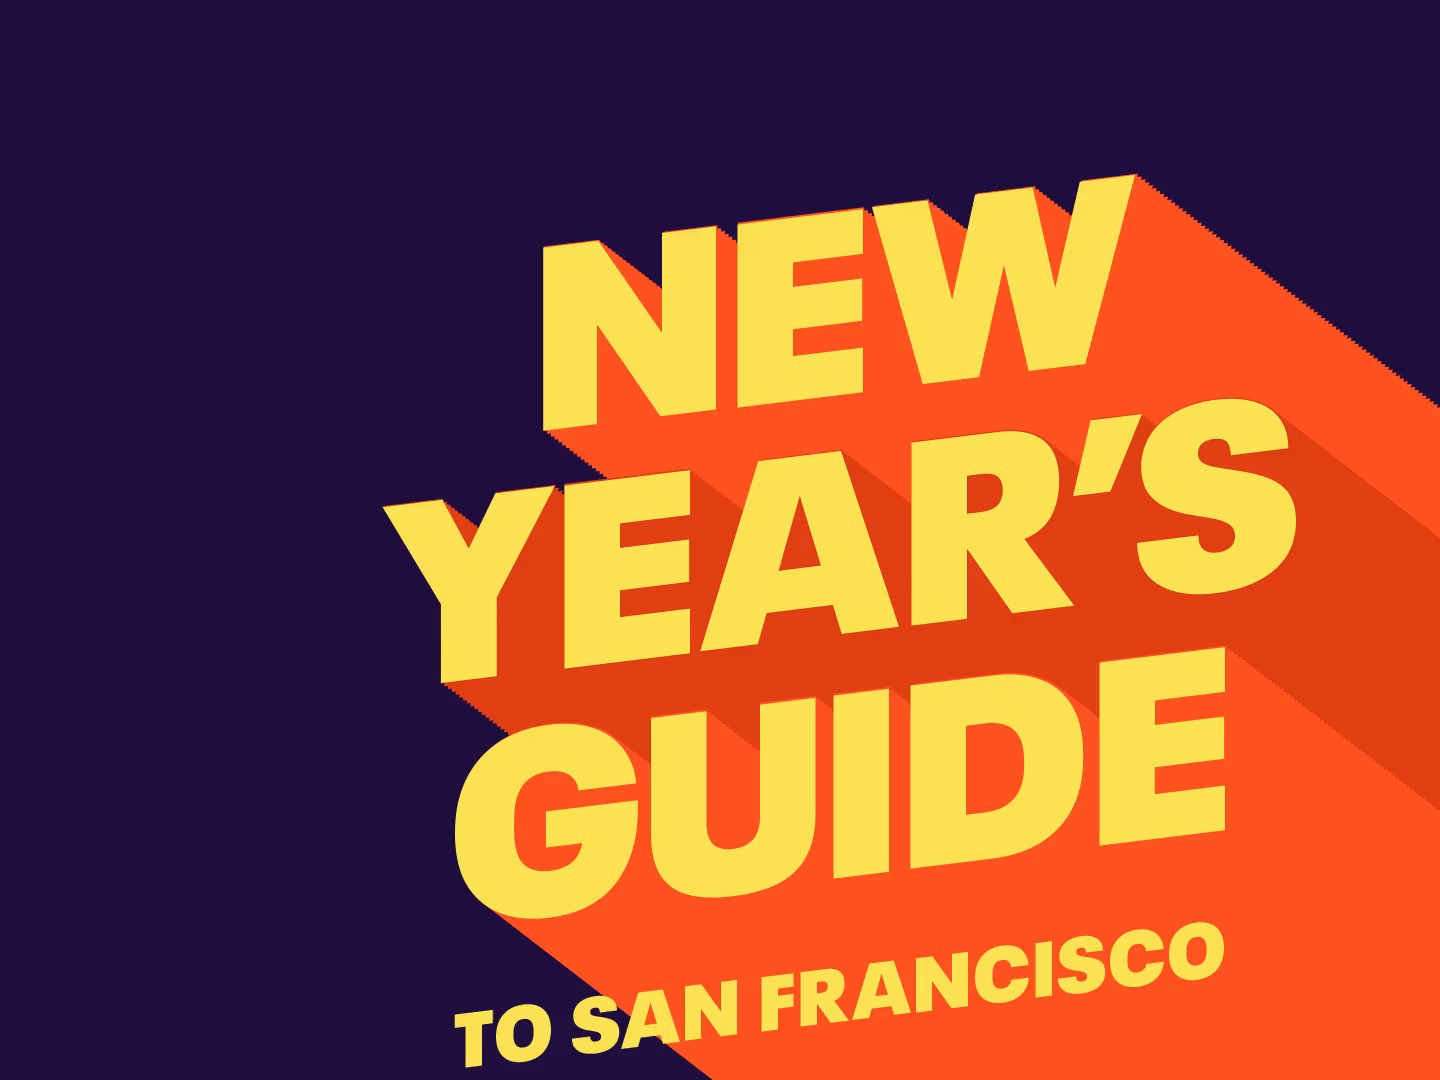 New Year's Eve Guide by Alex Pytlarz for Eventbrite on Dribbble